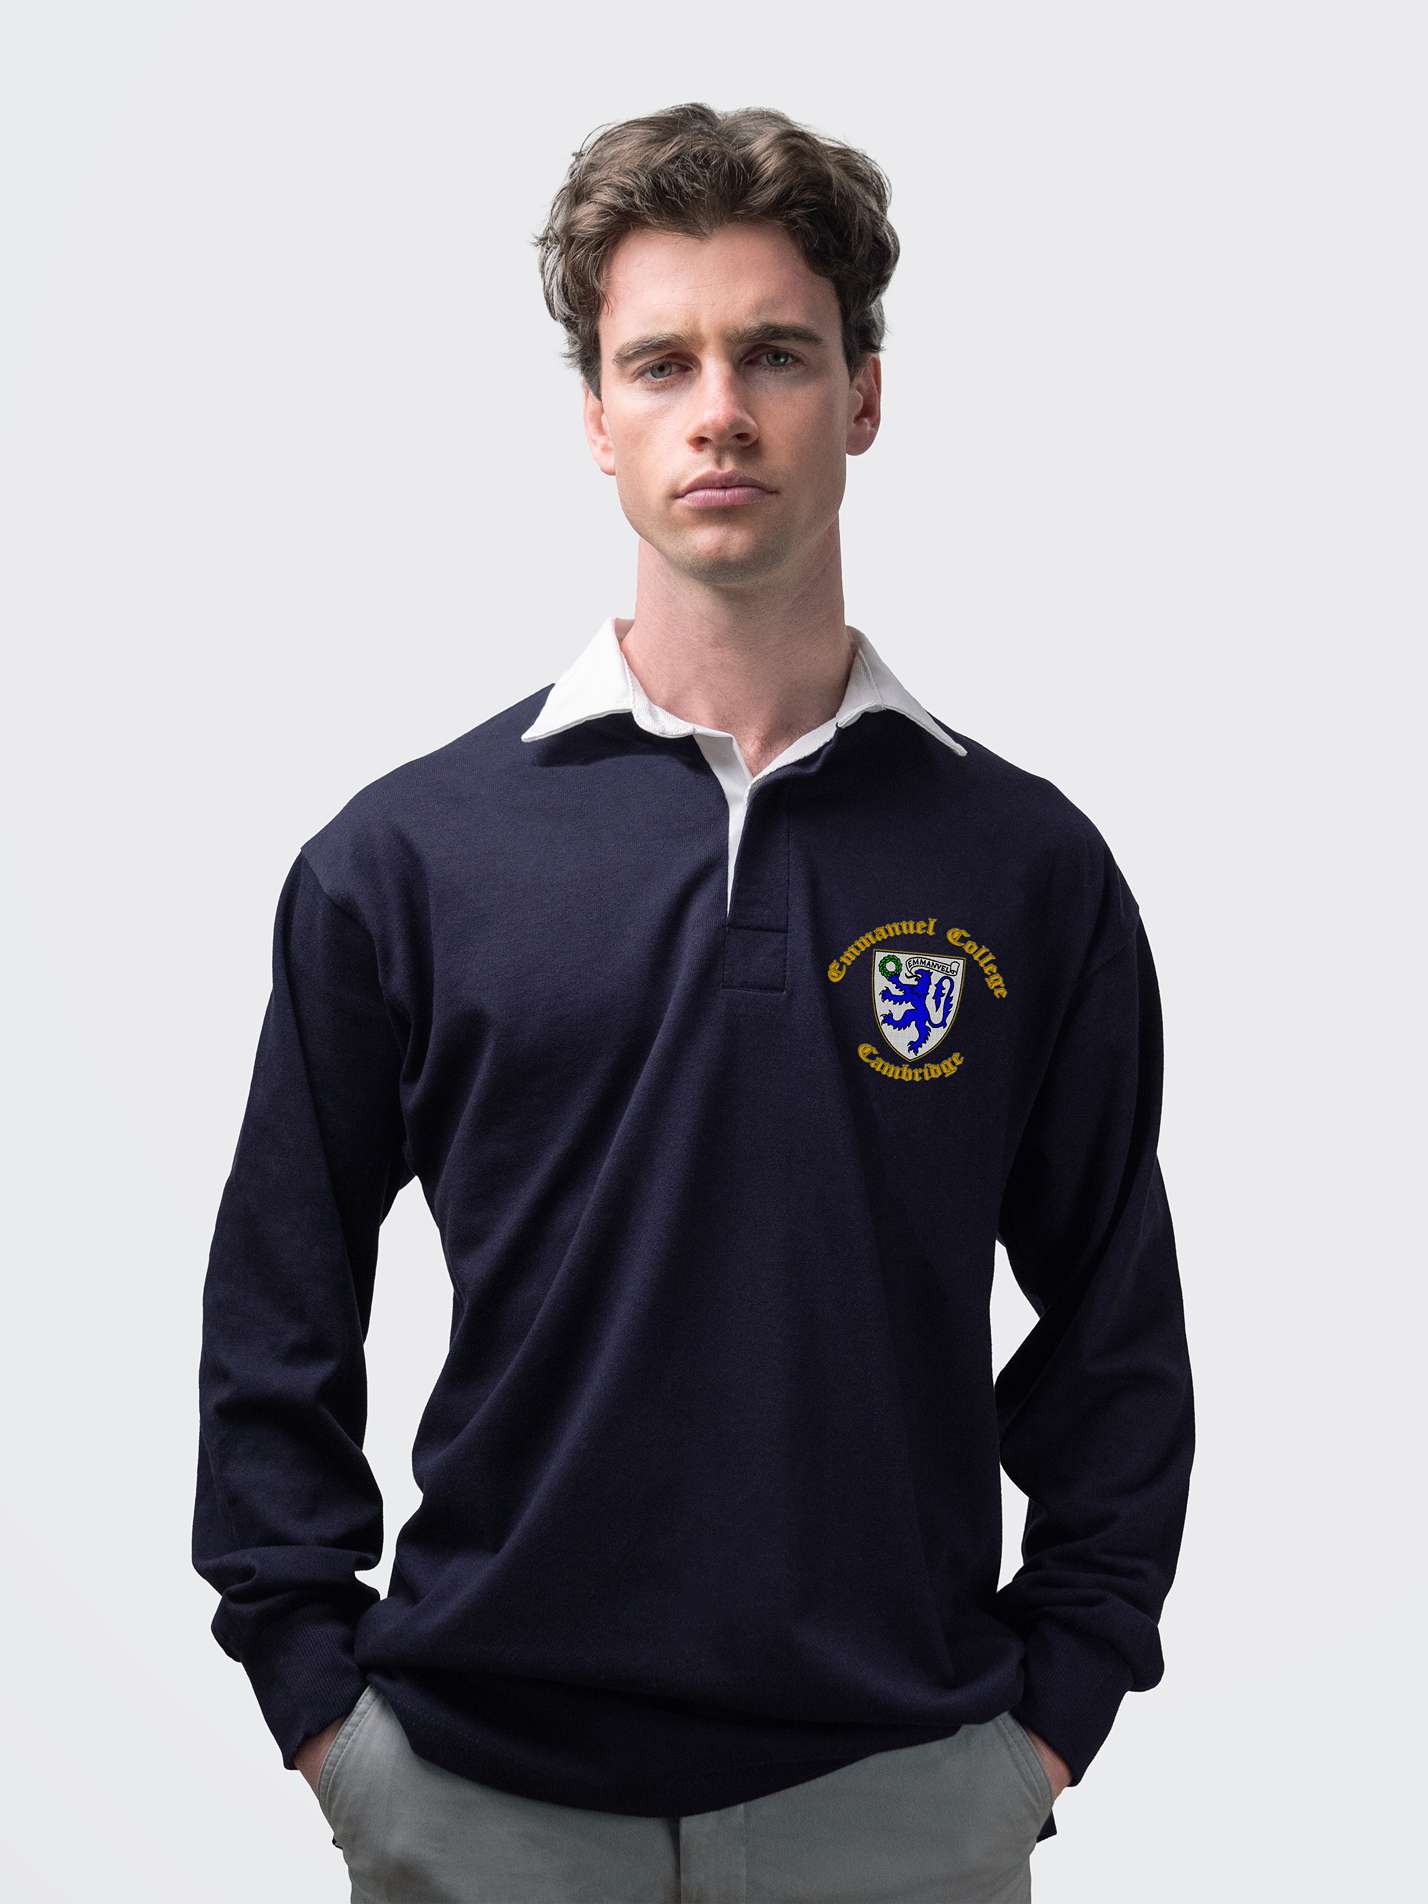 Emmanuel student wearing an embroidered mens rugby shirt in navy